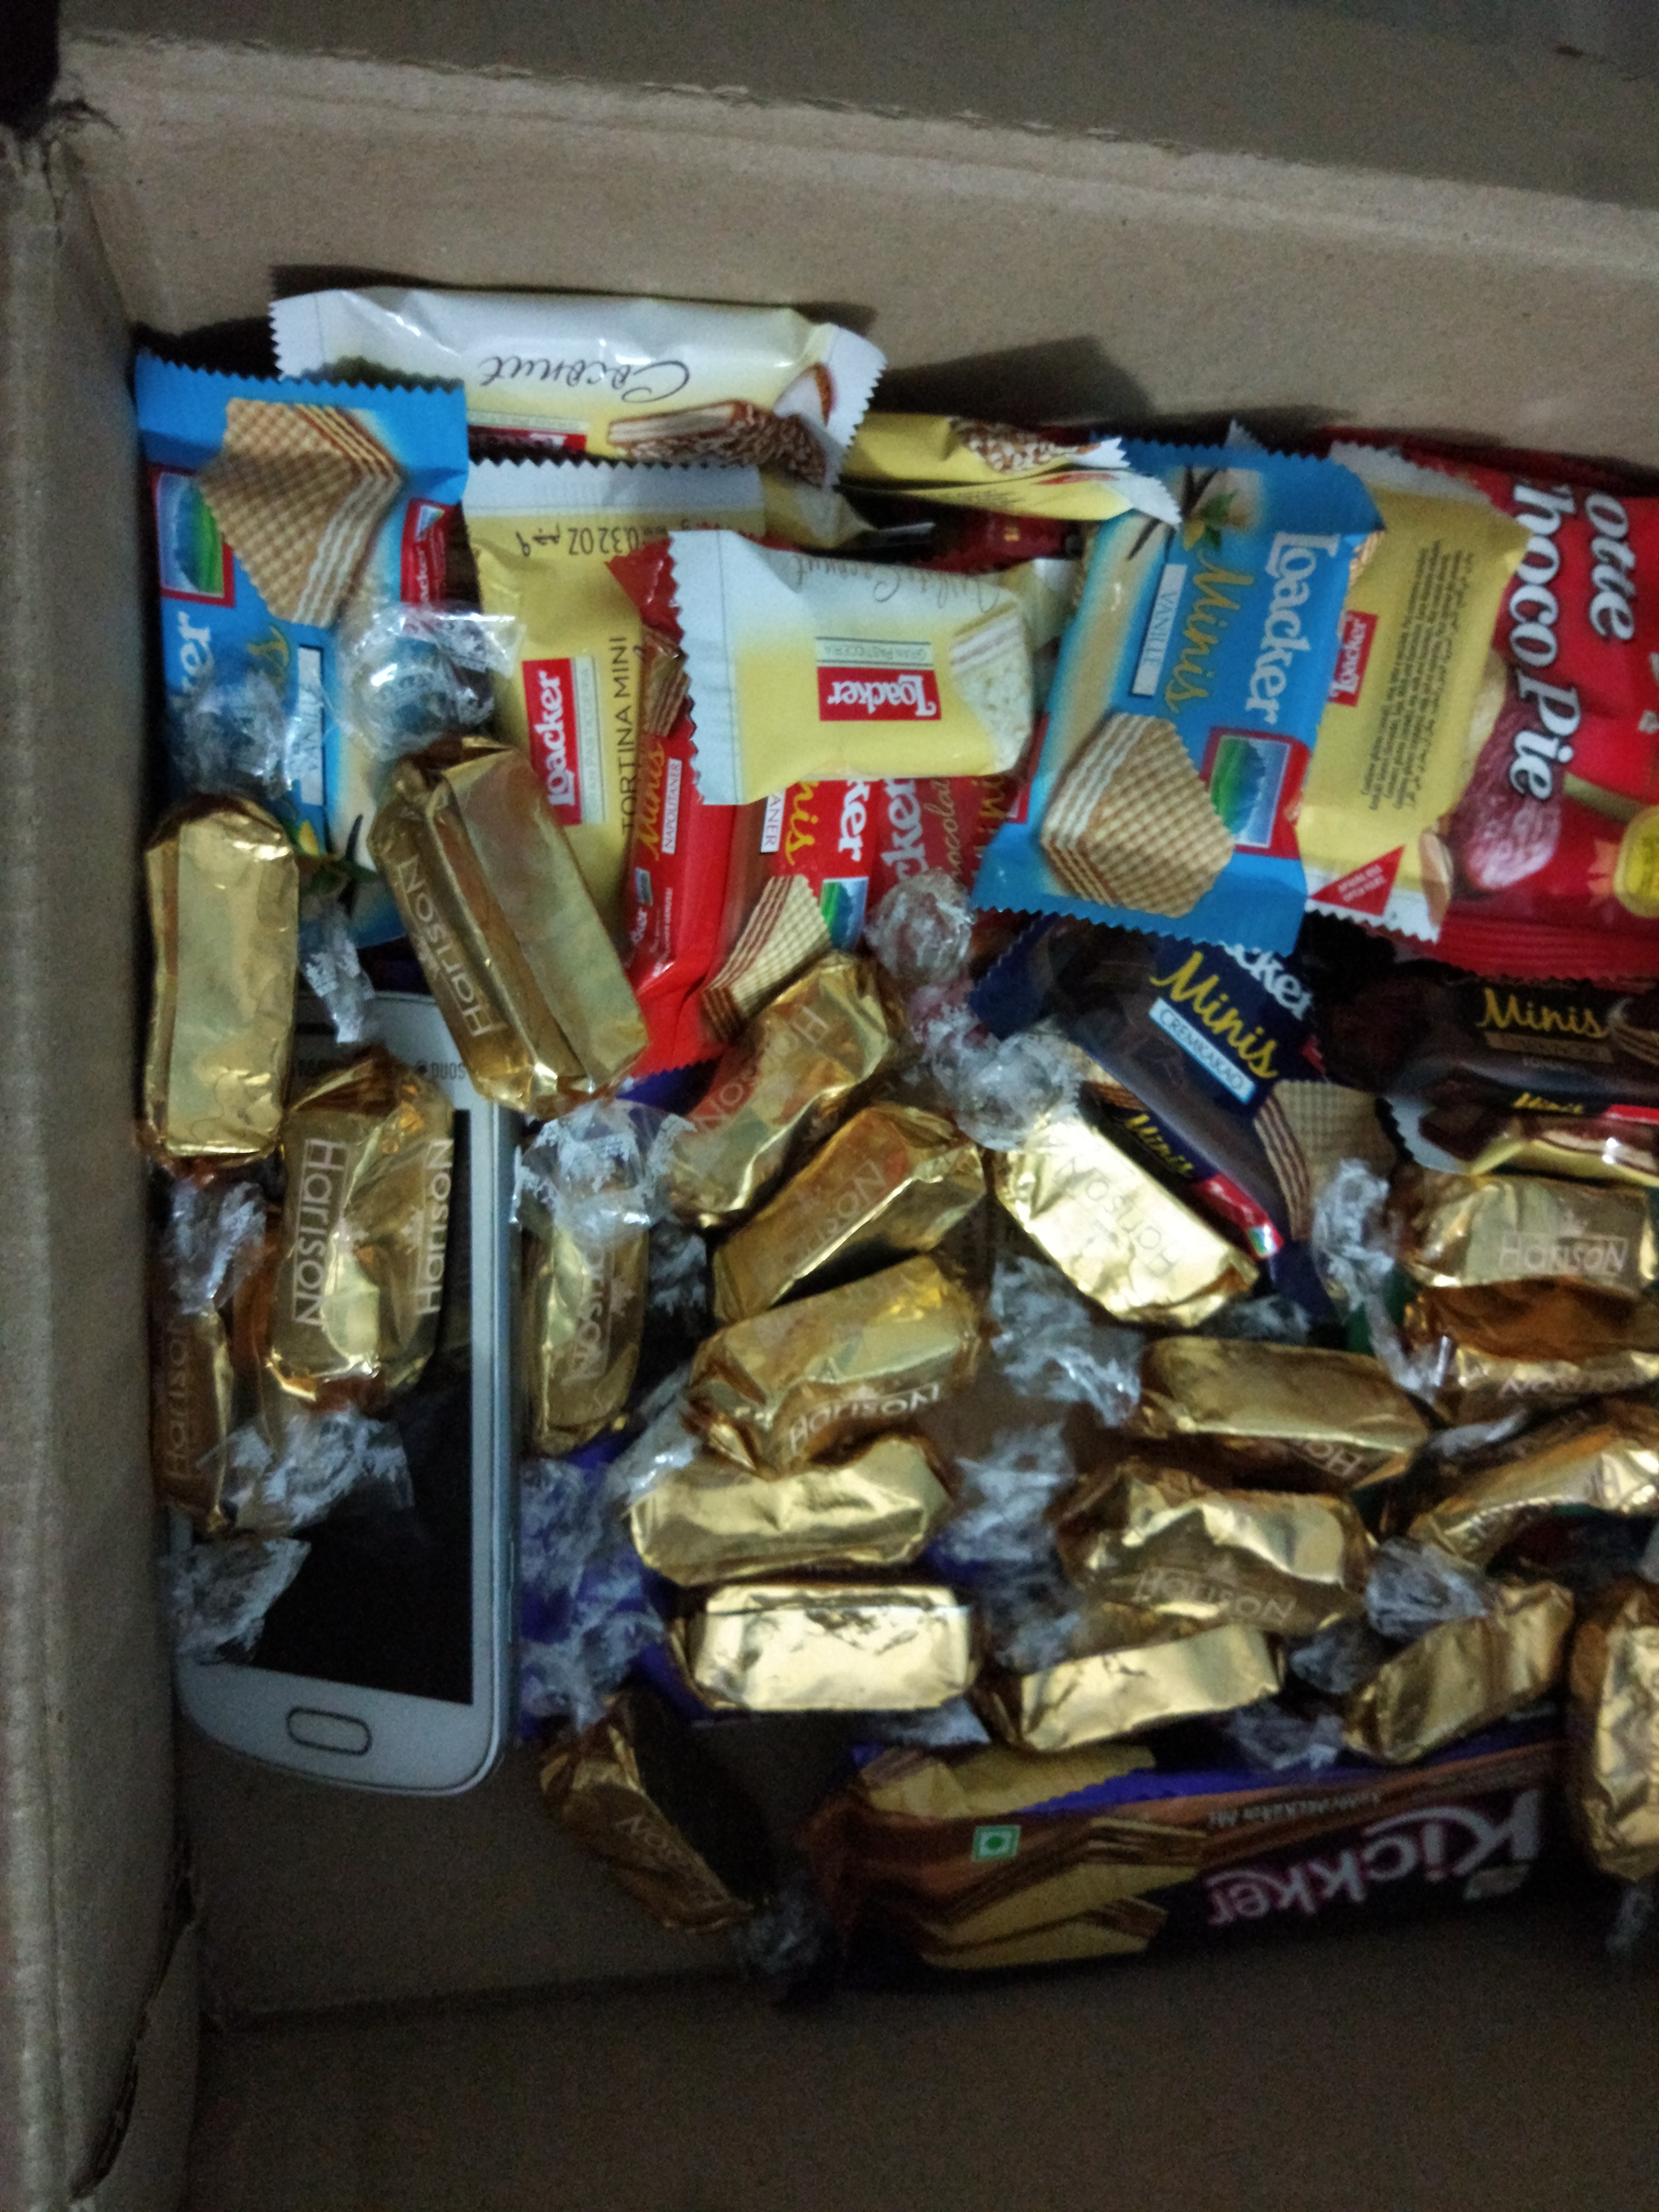 samsung phone in candy box